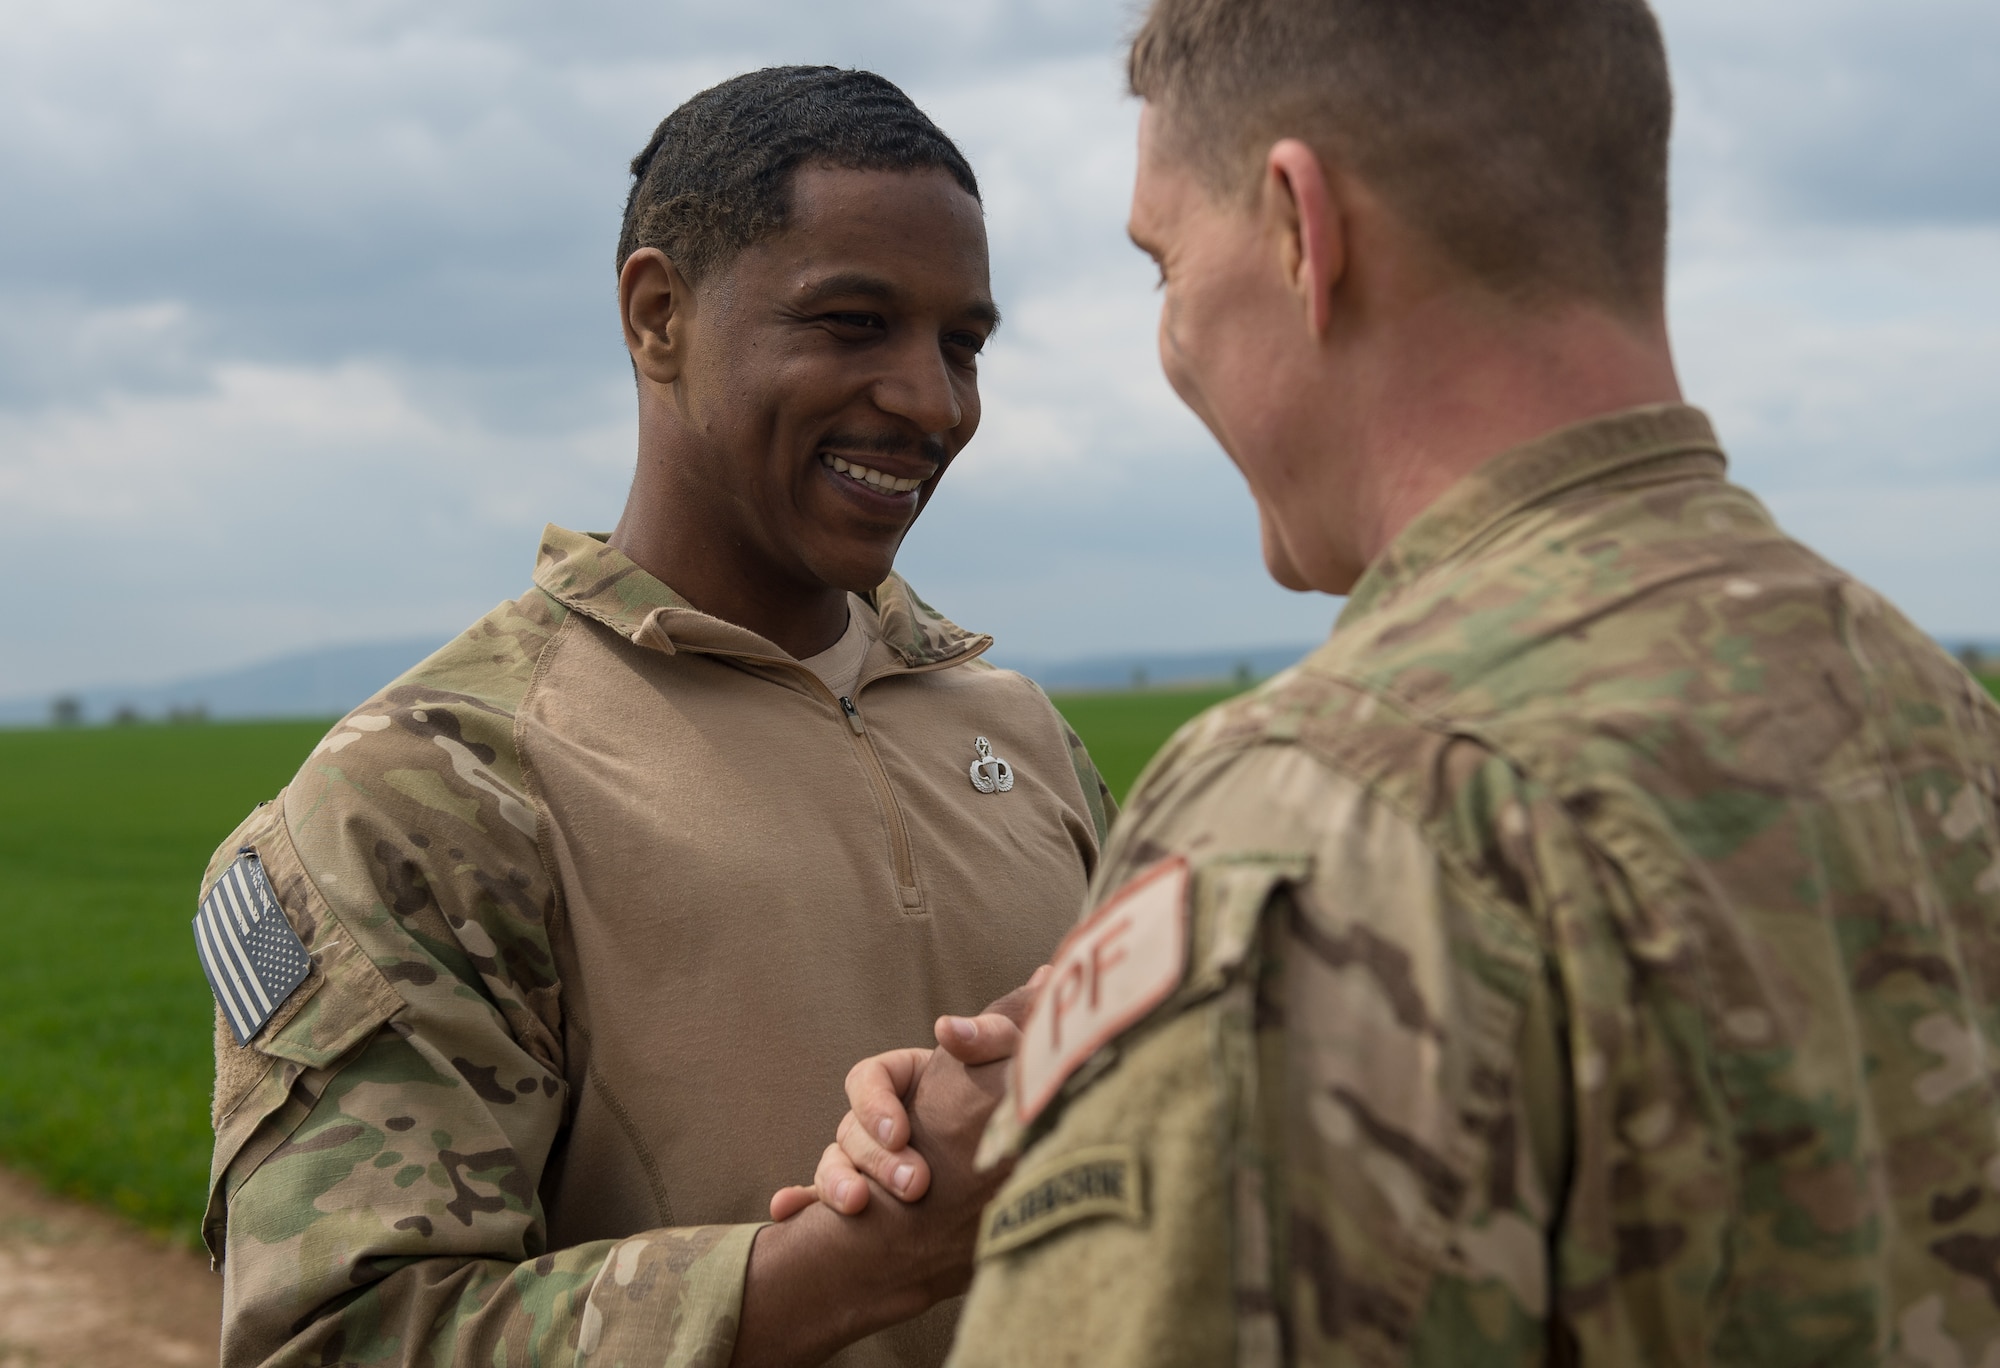 Robby Royster, 435th Security Forces Squadron close precision engagement team leader, shakes hands with Staff Sgt. Derek Halverson, 435th SFS personnel parachutist program manager, after Royster was awarded his master rated parachutist badge at Alzey, Germany, April 12, 2017. The master rated parachutist badge is an elite badge granted to few airborne service members which Royster earned with less than ten years in service. (U.S. Air Force photo by Staff Sgt. Nesha Humes)